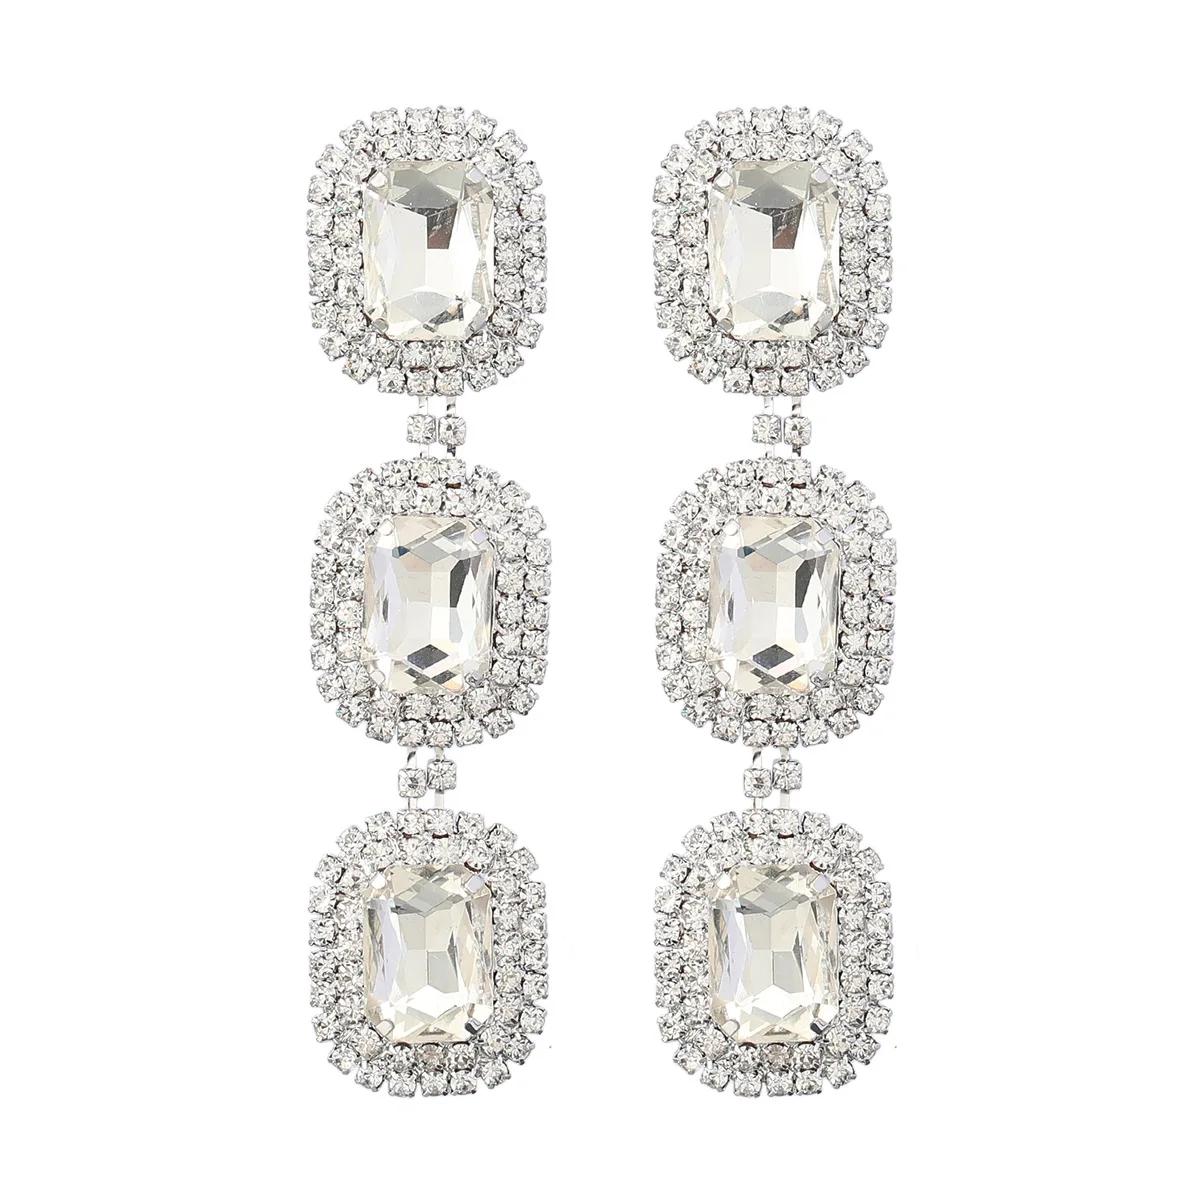 2022 Multilayer Rhinestone Square Party Earrings Wholesale